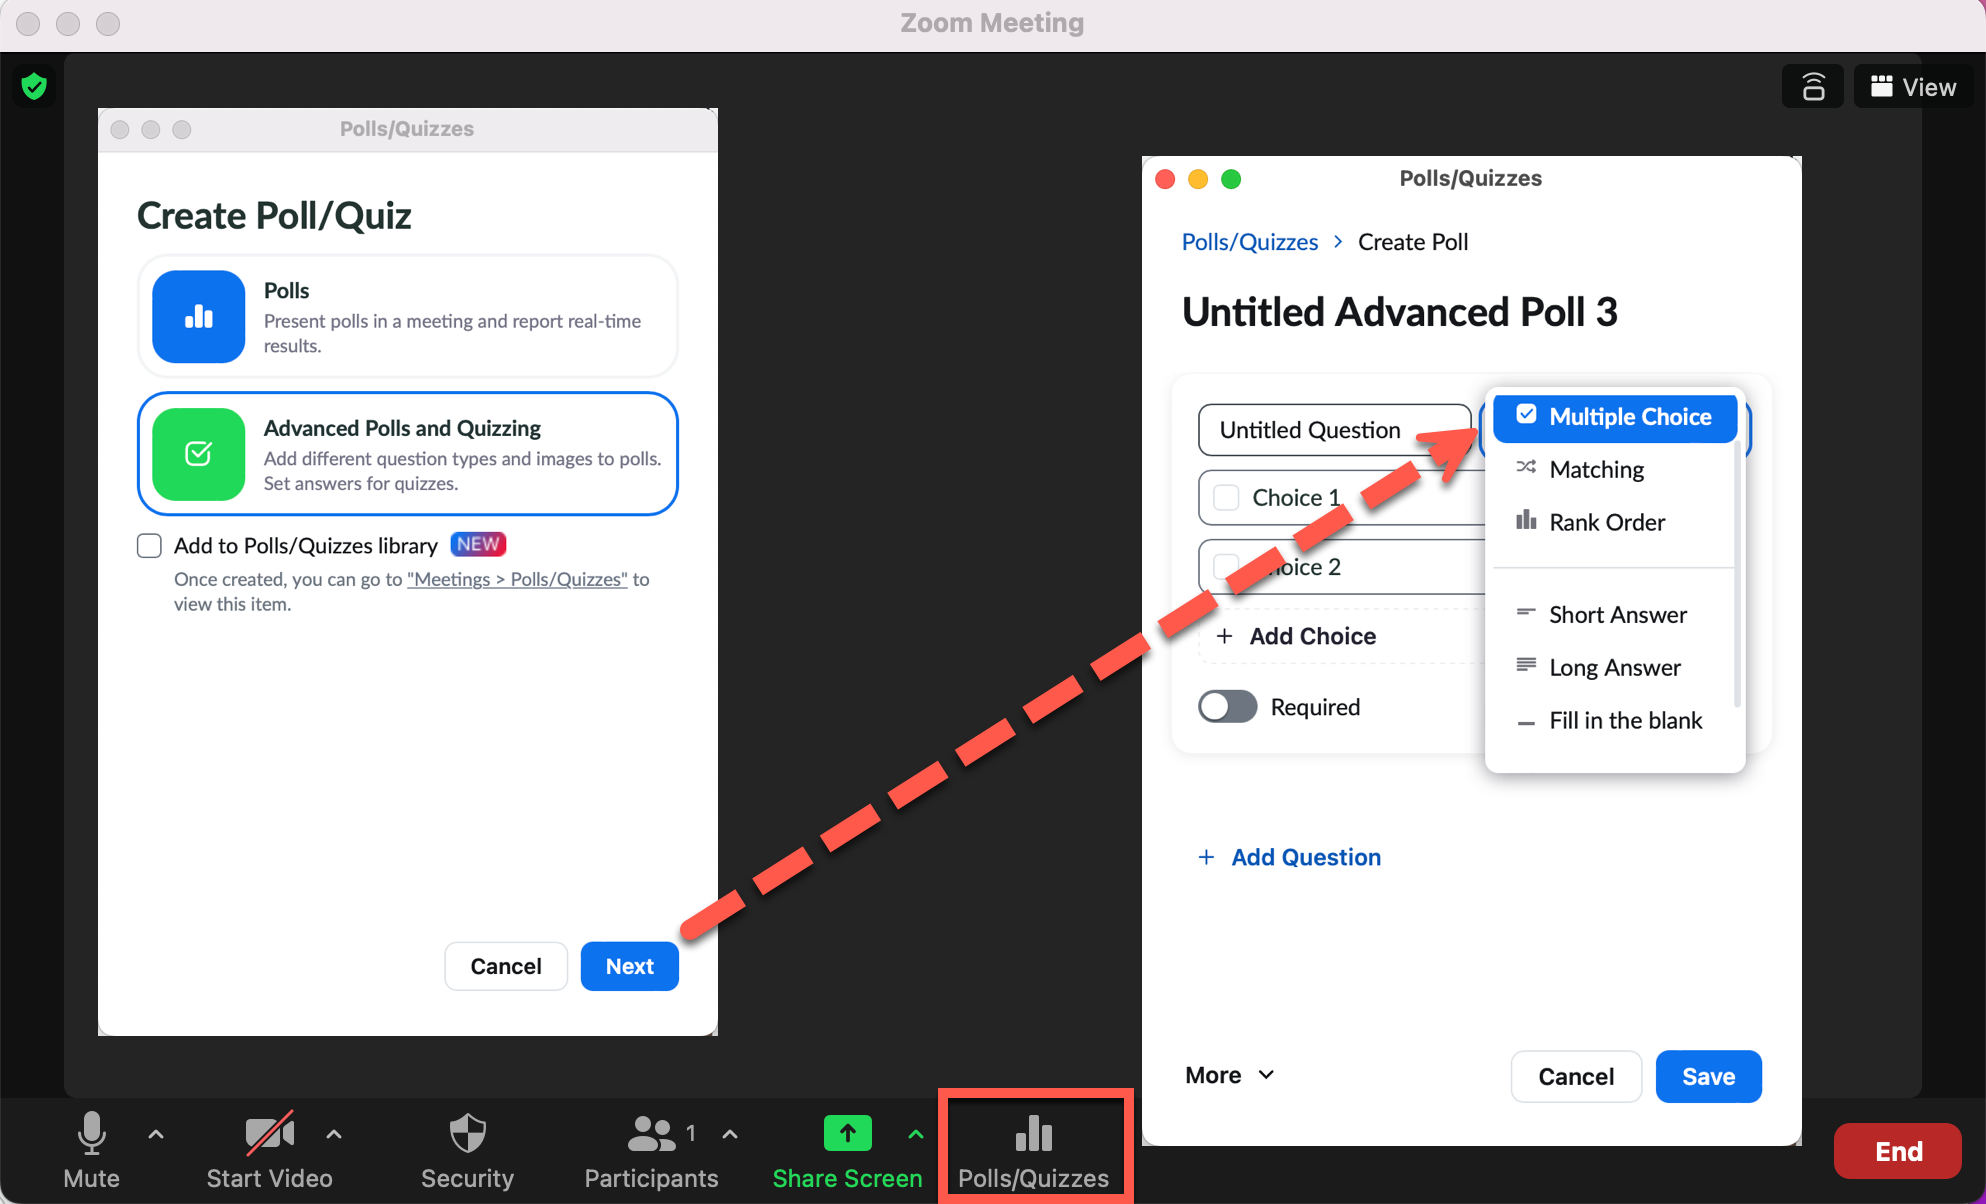 Advanced Polls and Quizzes option in Zoom meeting interface.